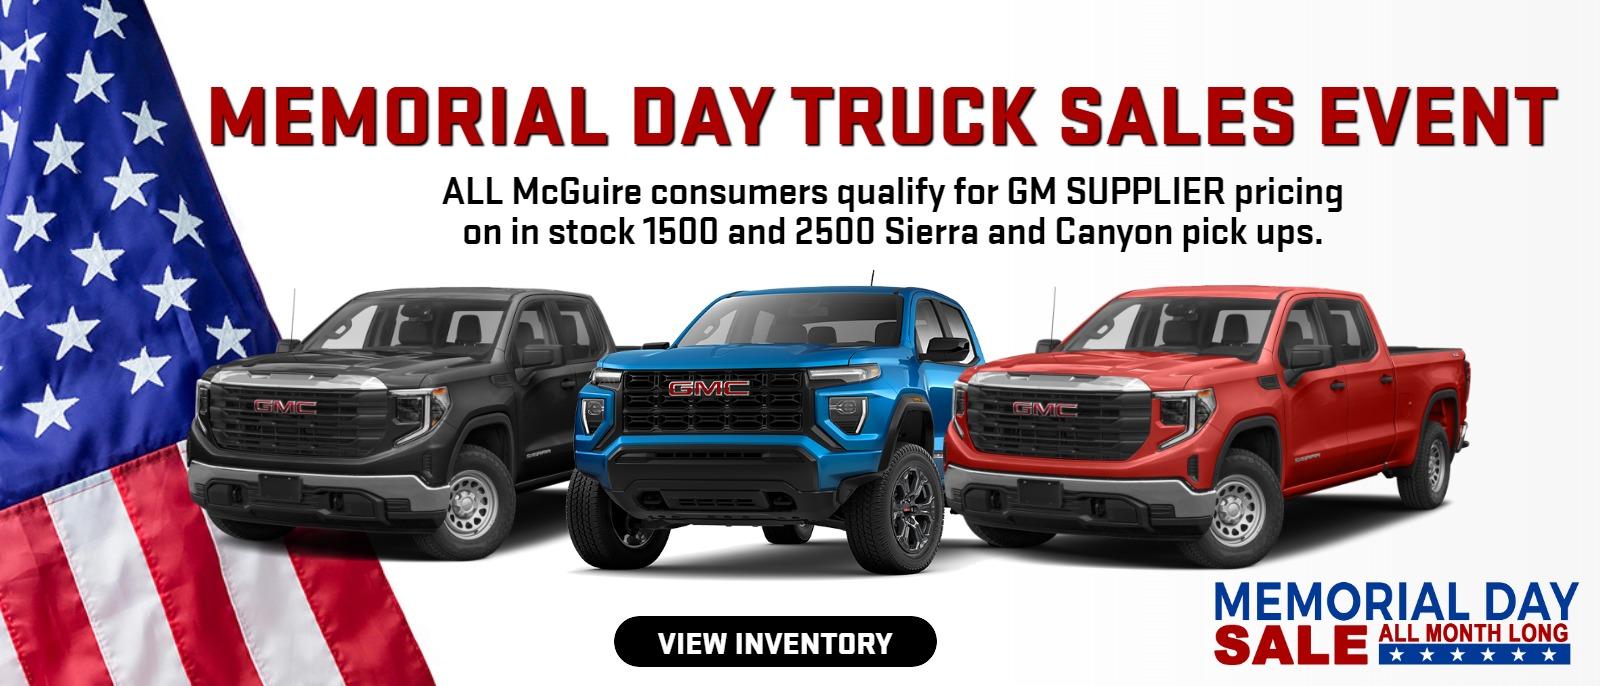 Memorial Day TRUCK SALES EVENT

ALL McGuire consumers qualify for GM SUPPLIER pricing
on in stock 1500 and 2500 Sierra and Canyon pick ups.